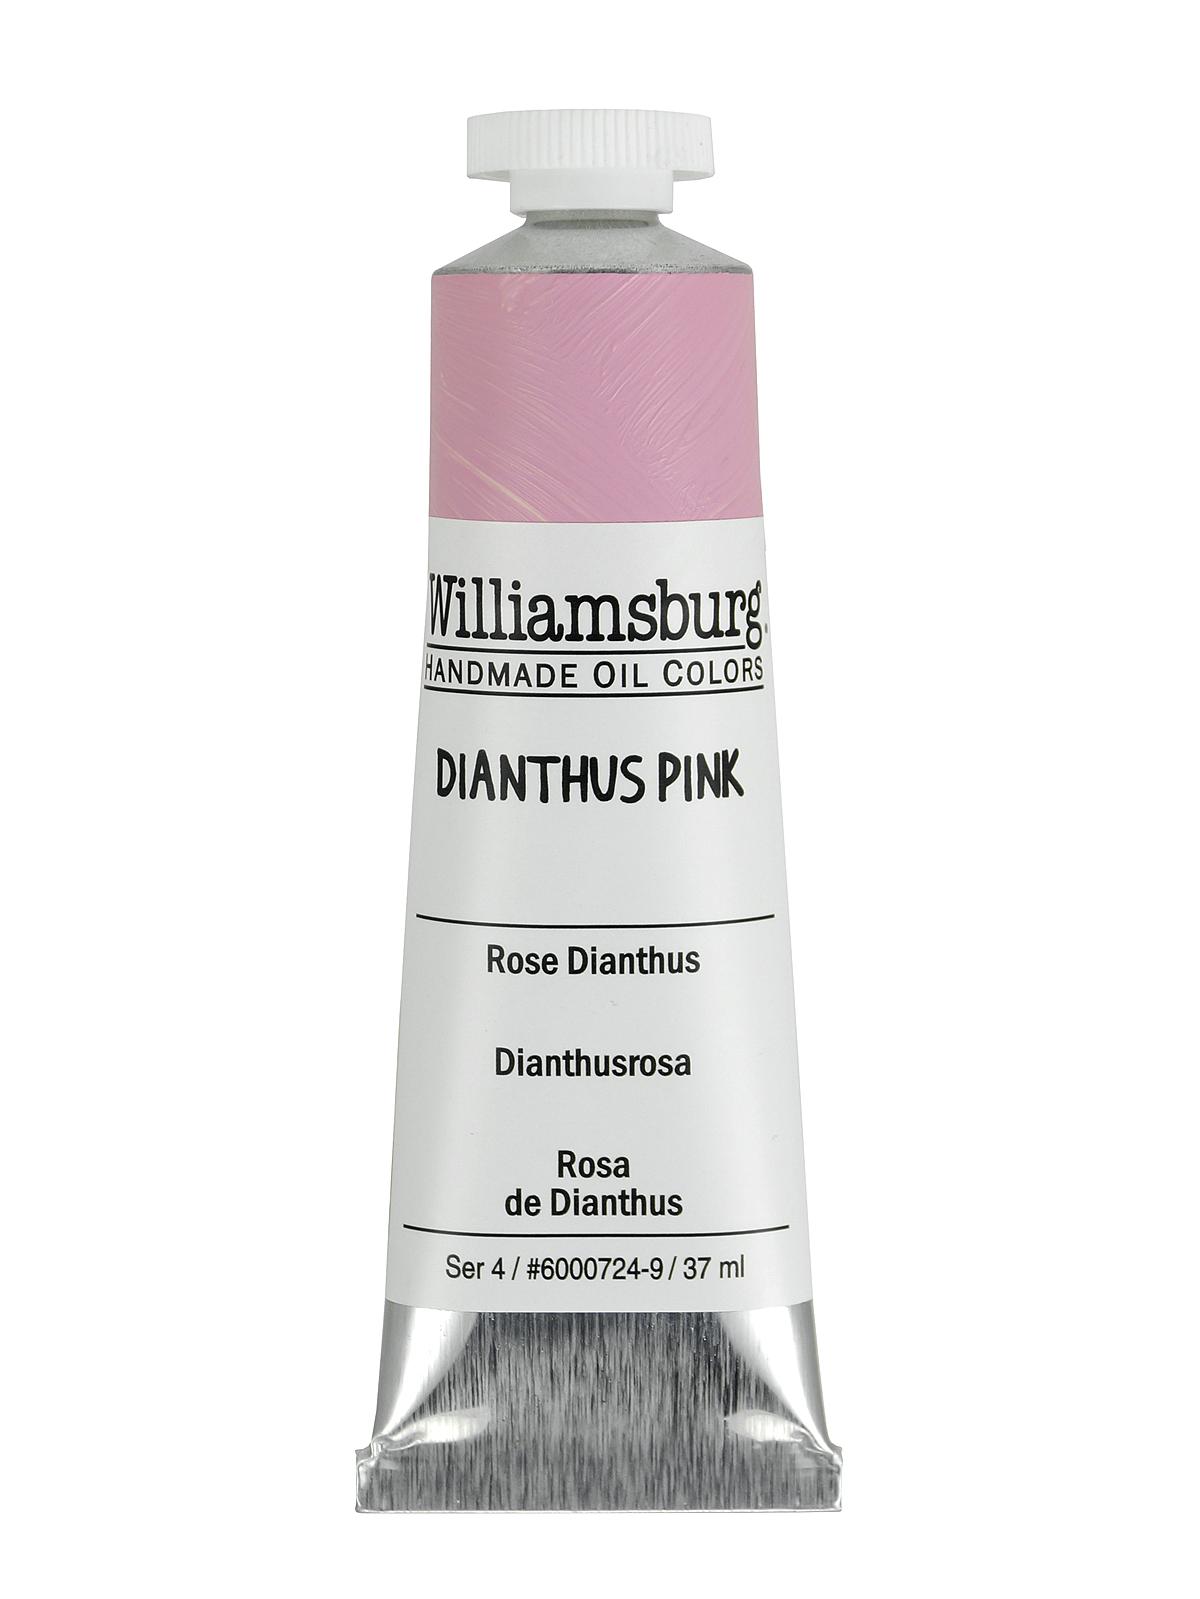 Handmade Oil Colors Dianthus Pink 37 Ml